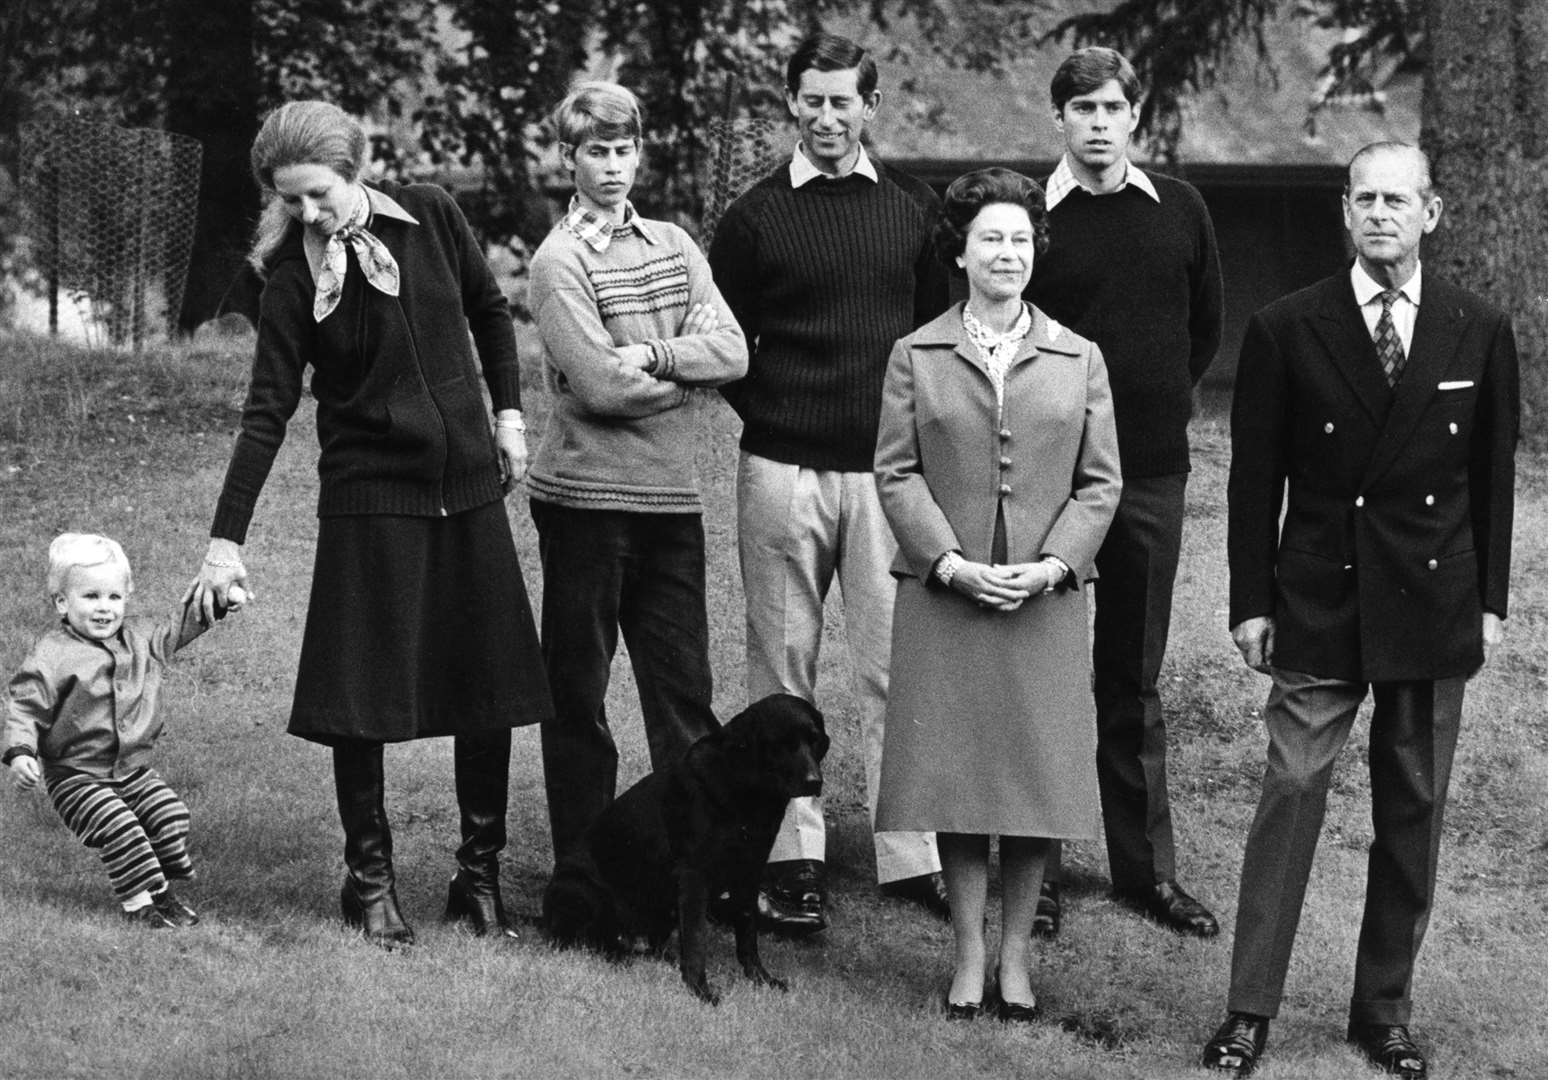 The Queen and her family, including her first grandchild Peter Phillips, at Balmoral on the monarch and Philip’s 32nd wedding anniversary in 1979 (Ron Bell/PA)